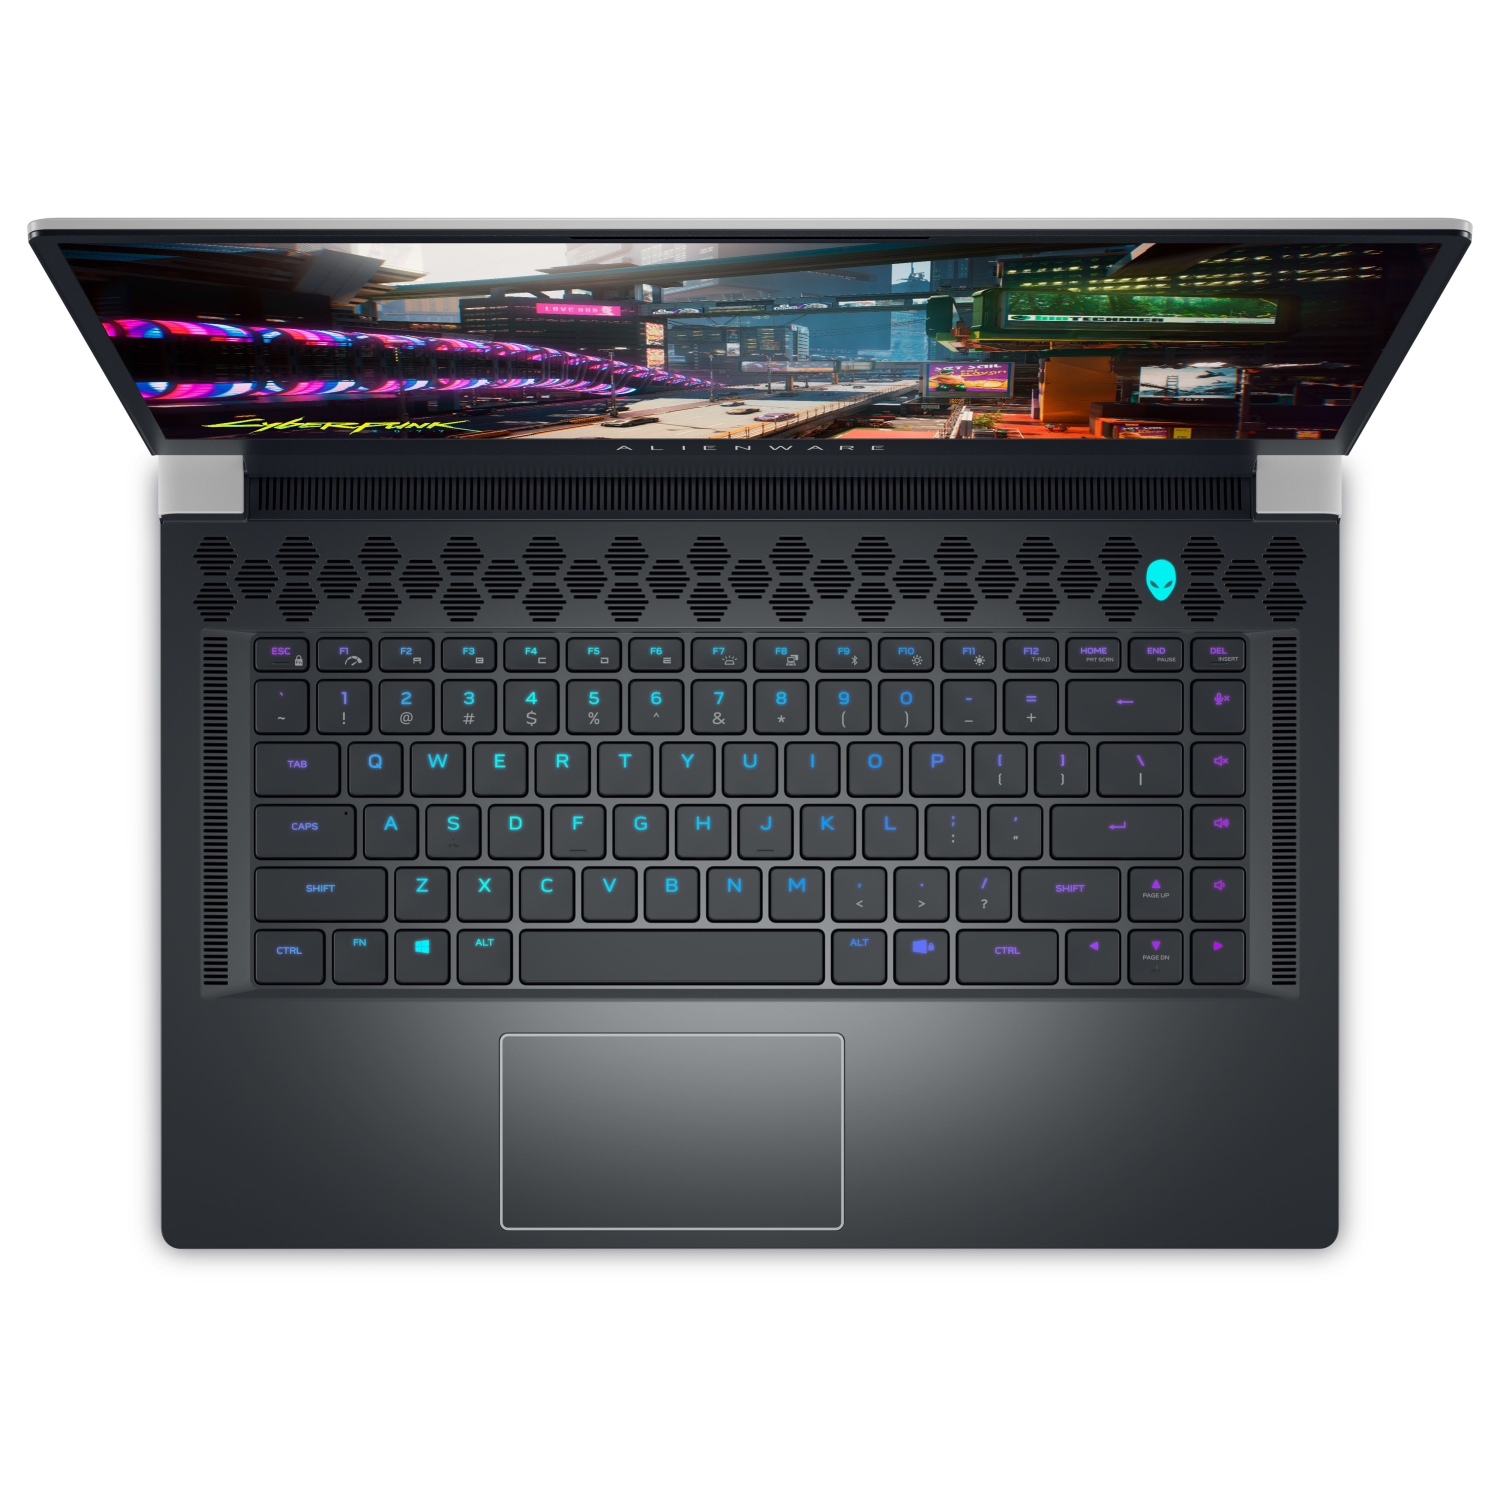 Refurbished (Excellent) – Dell Alienware X15 R2 Gaming Laptop (2022) | 15.6" FHD | Core i7 - 2TB SSD - 16GB RAM - 3070 Ti | 14 Cores @ 4.7 GHz - 12th Gen CPU - 8GB GDDR6X